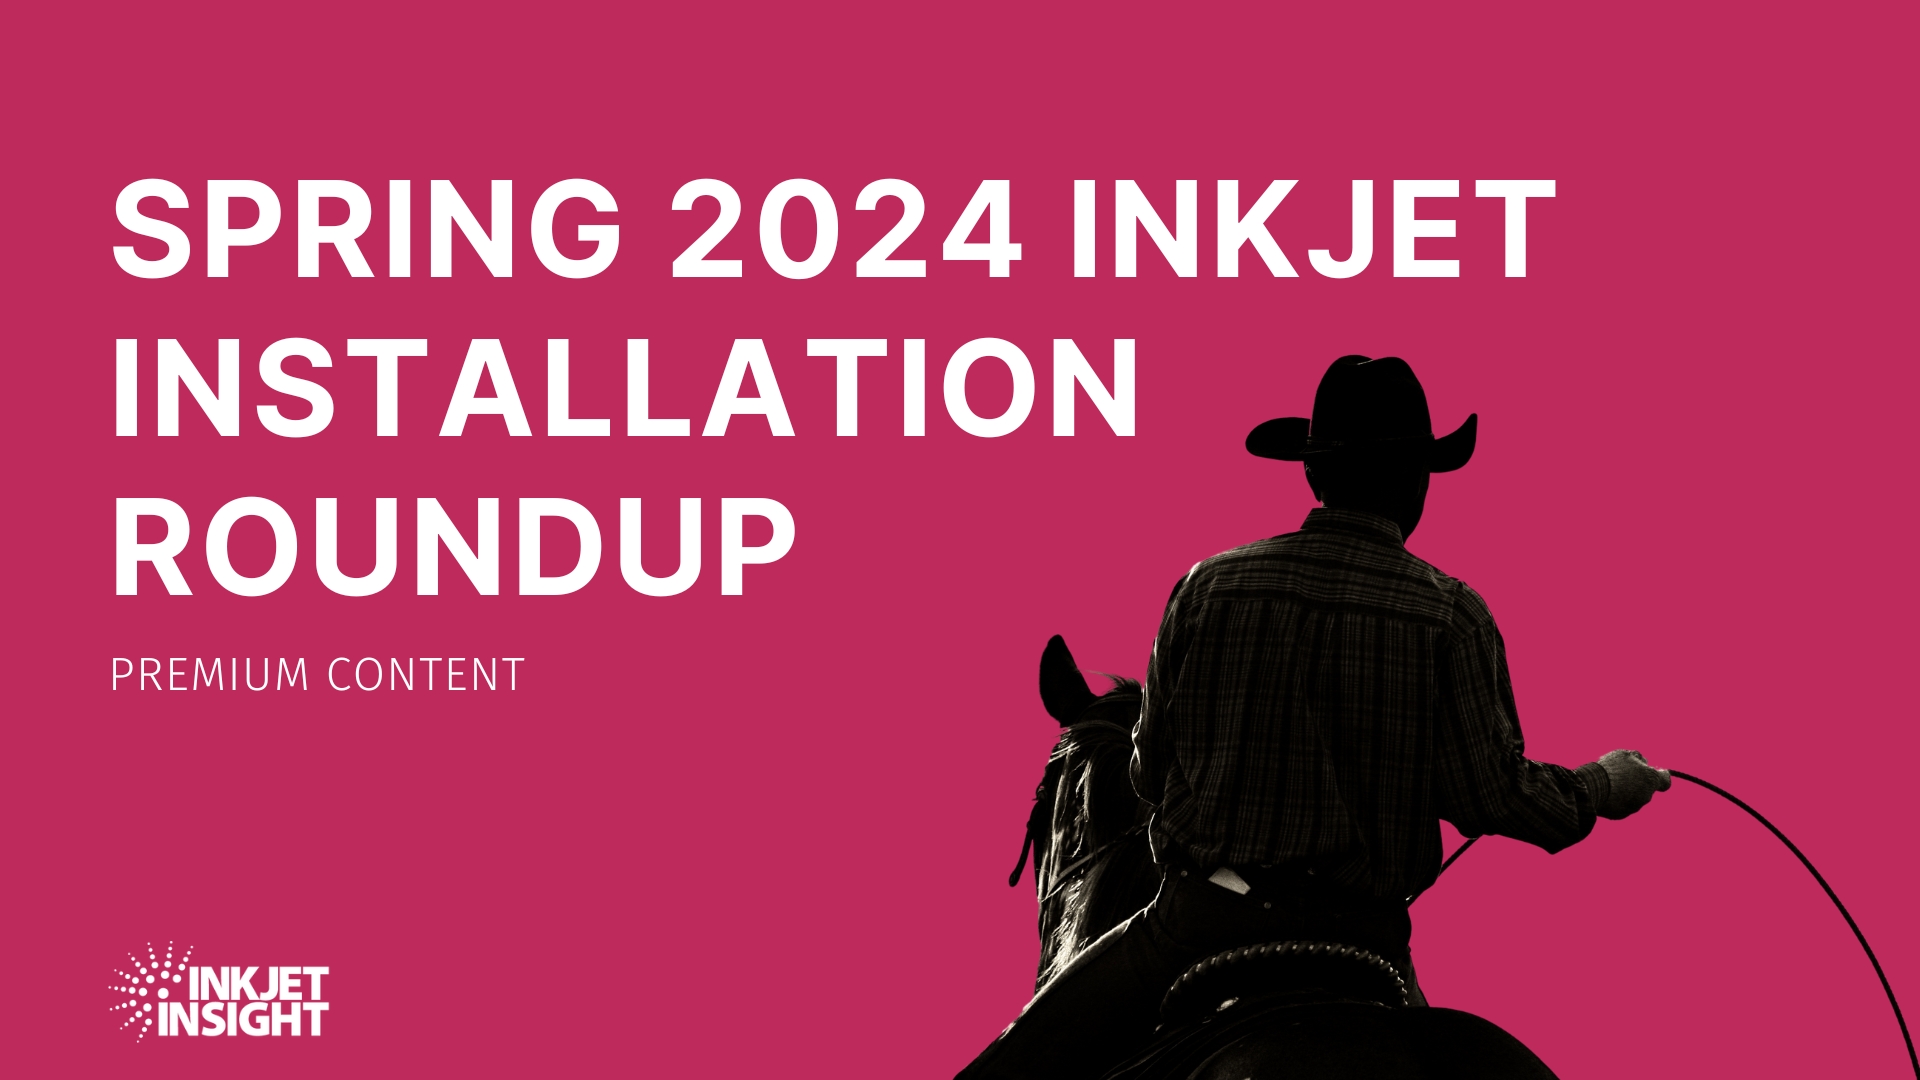 Featured image for “Spring 2024 Inkjet Installation Roundup”